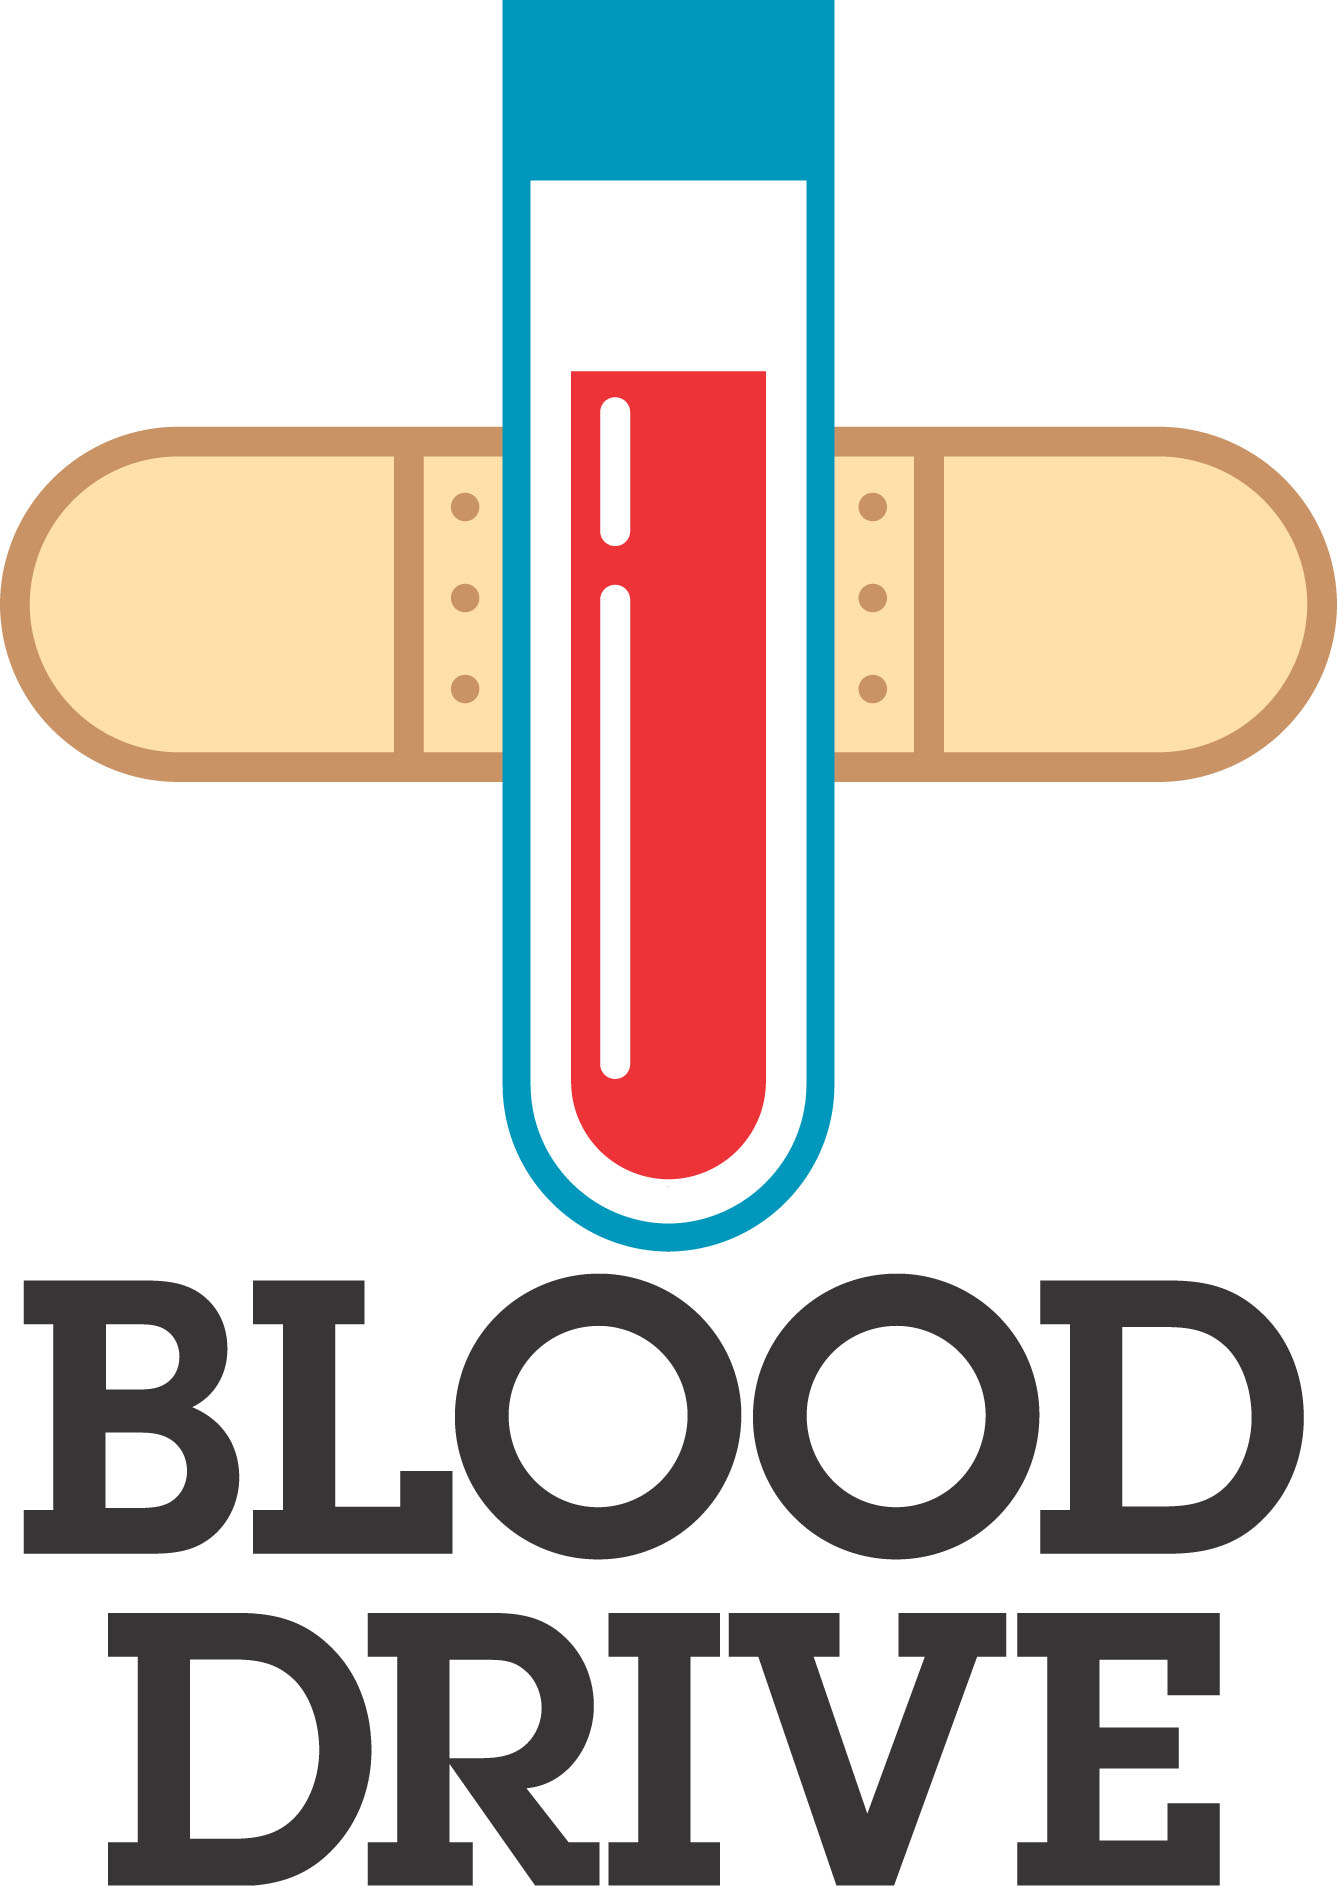 Blood Drive Images Clipart Be - Blood Drive Clipart